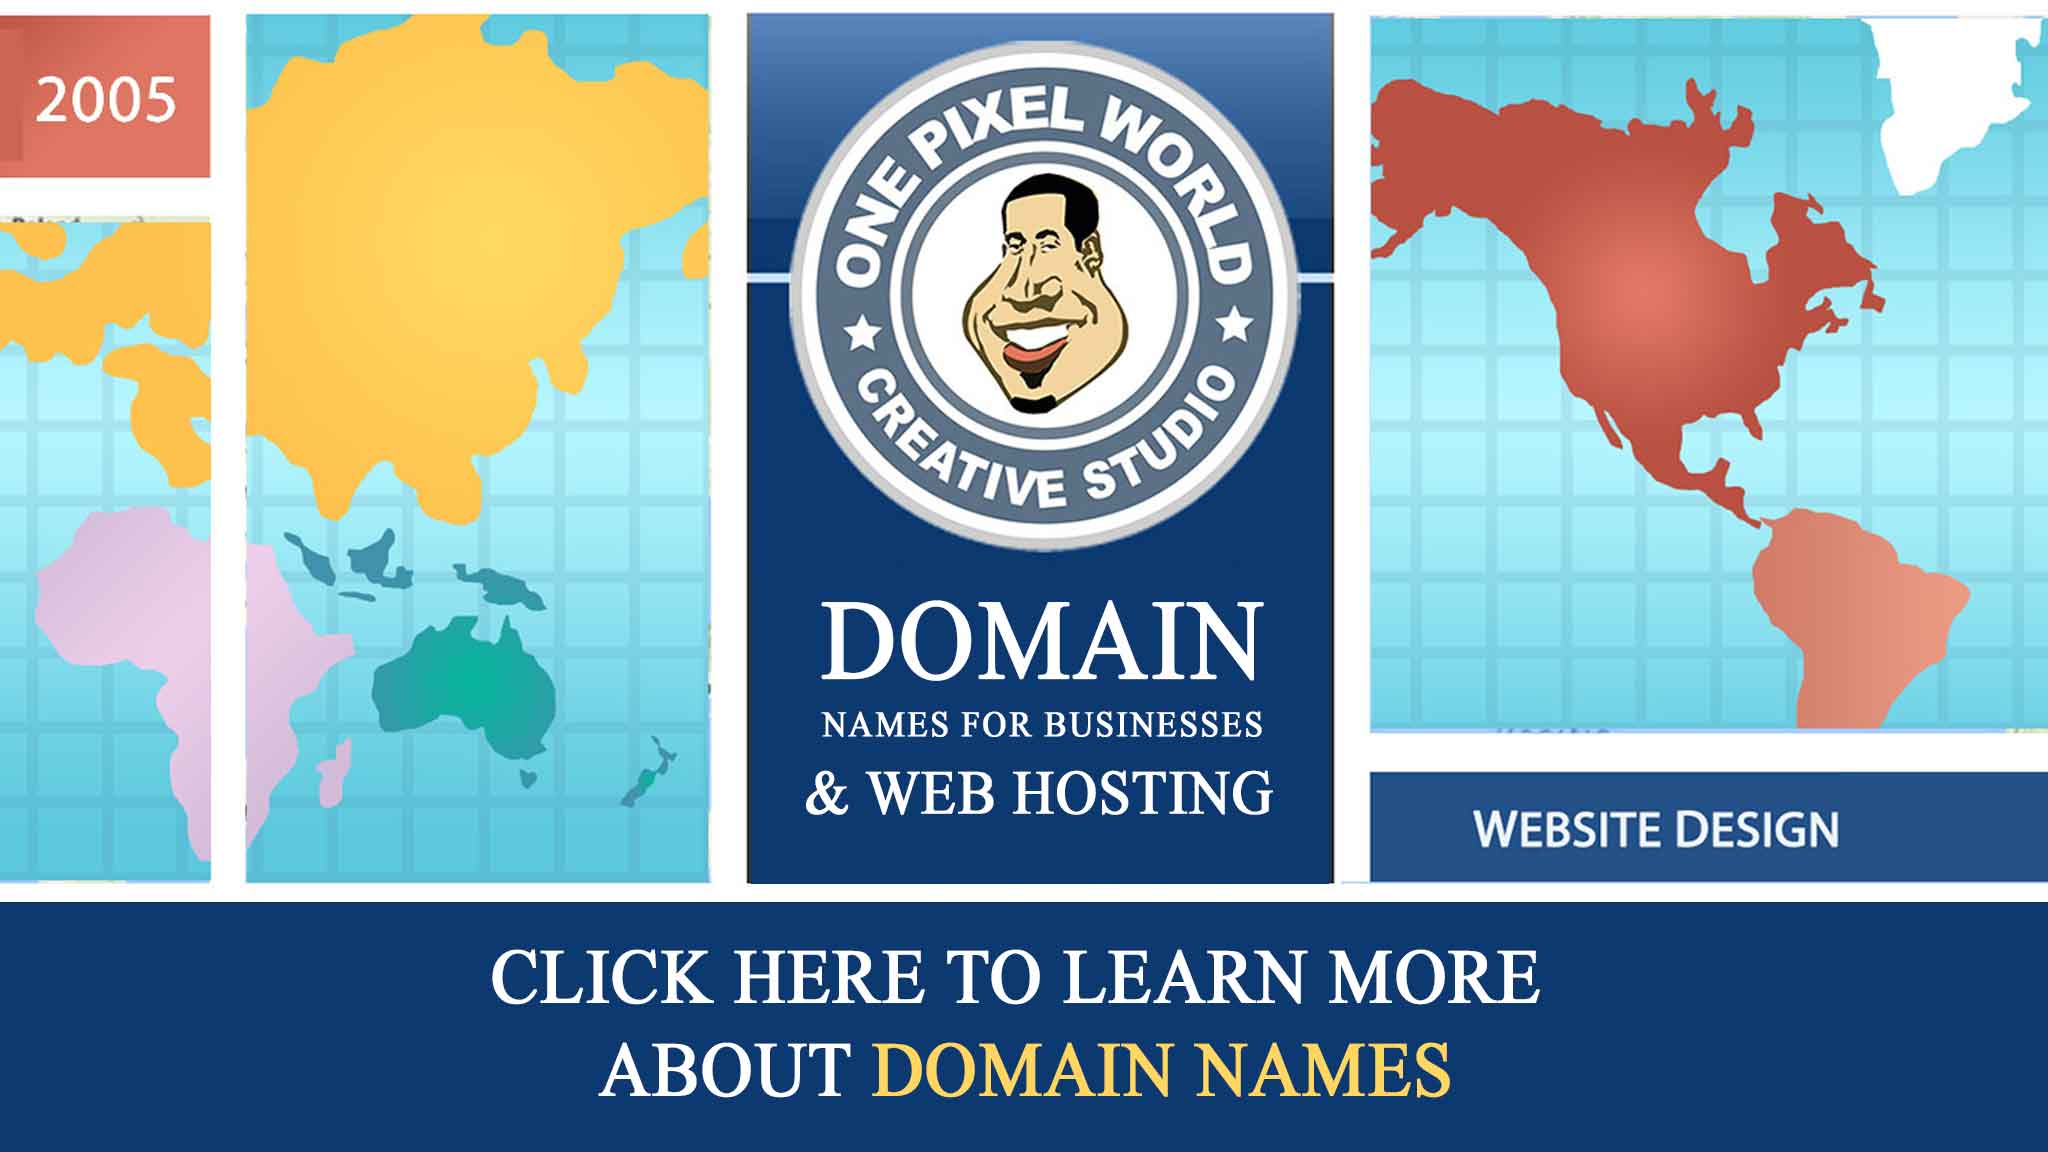 Learn more about Domains Name and Web hosting with One Pixel World